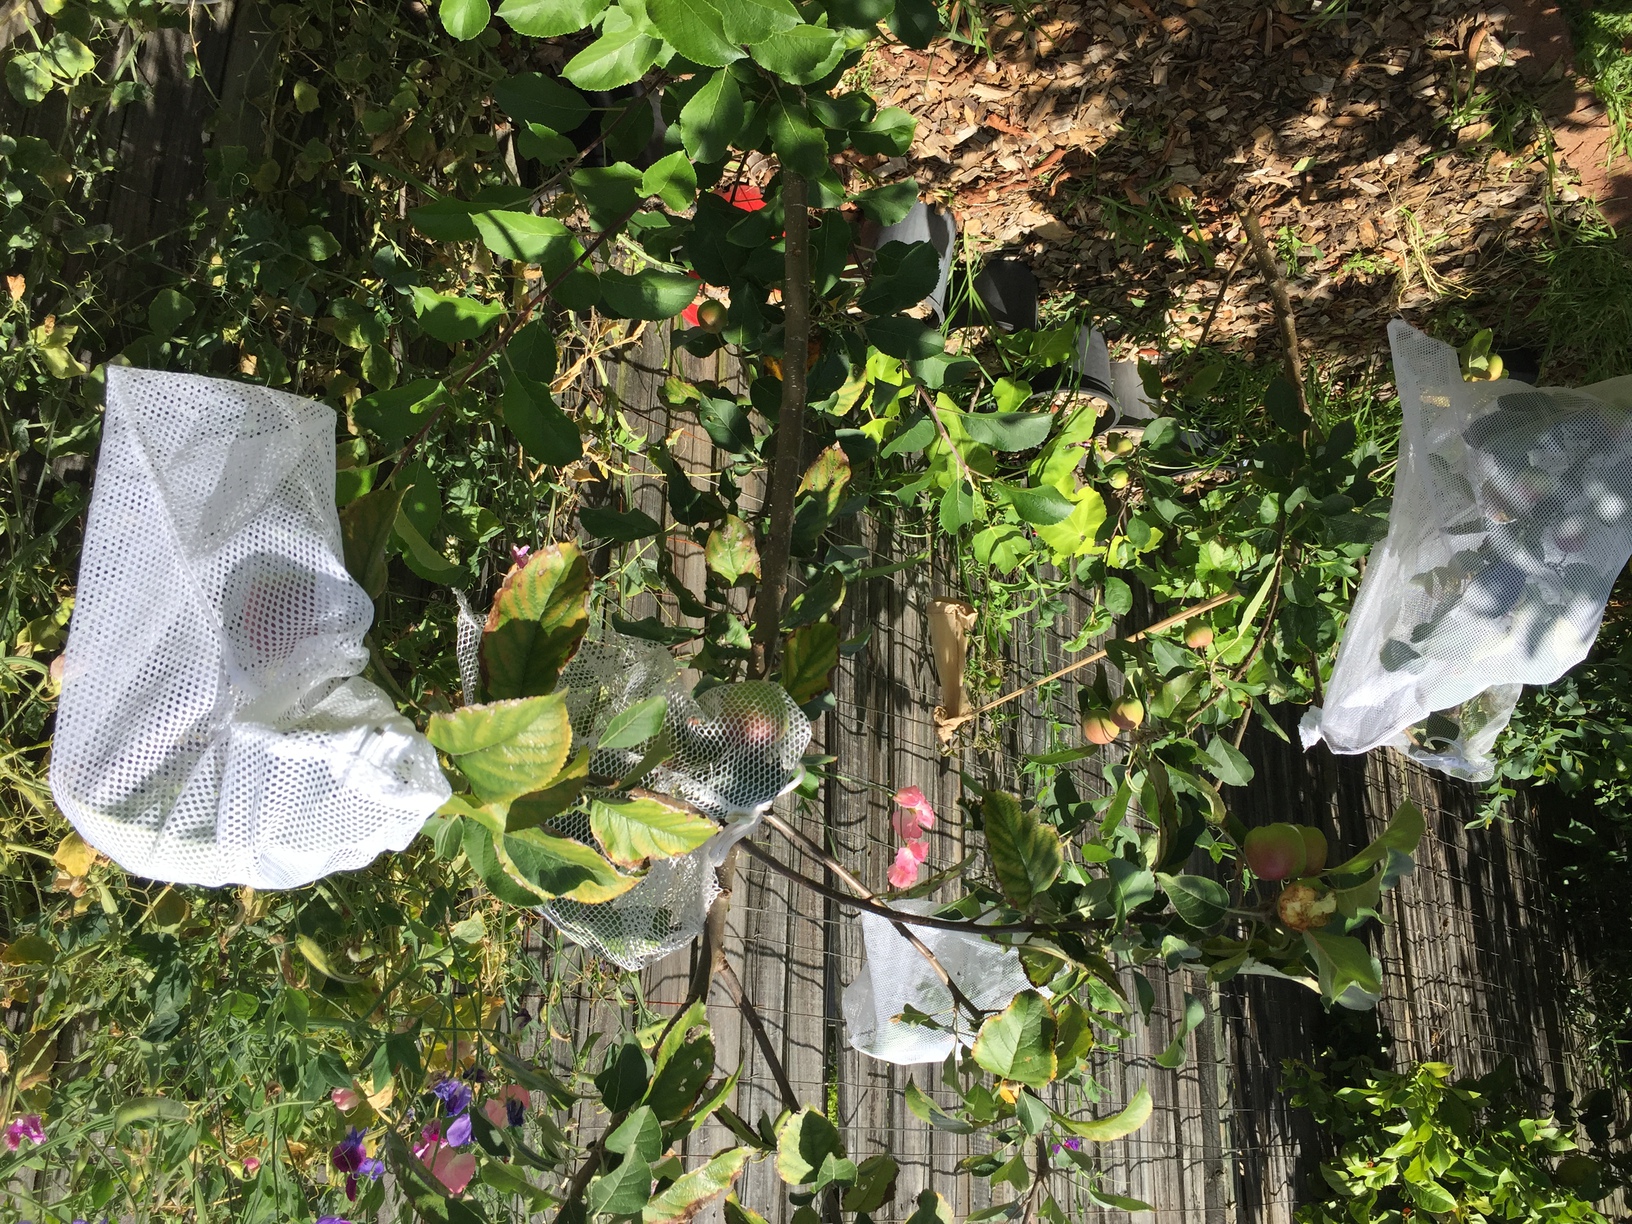 Laundry bags over the apples to try to protect them from birds and/or other creatures